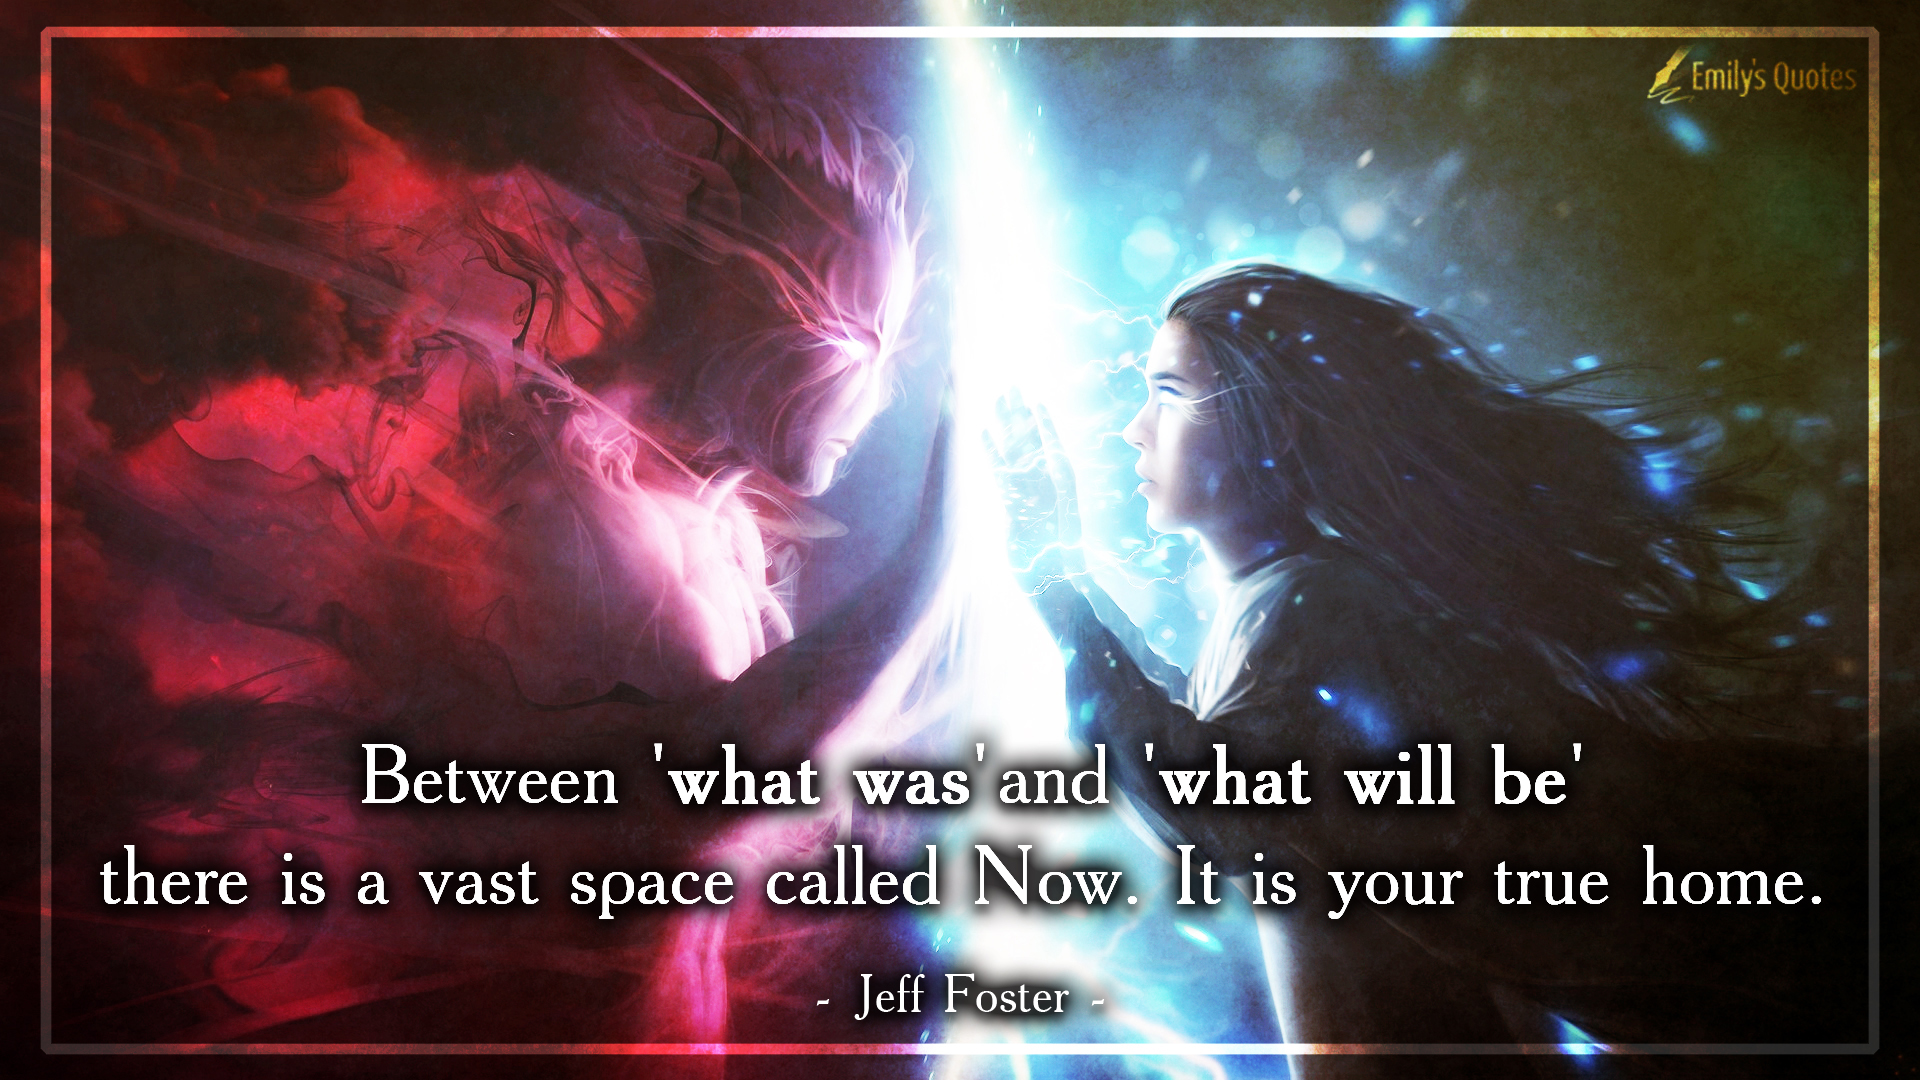 Between ‘what was’ and ‘what will be’ there is a vast space called Now